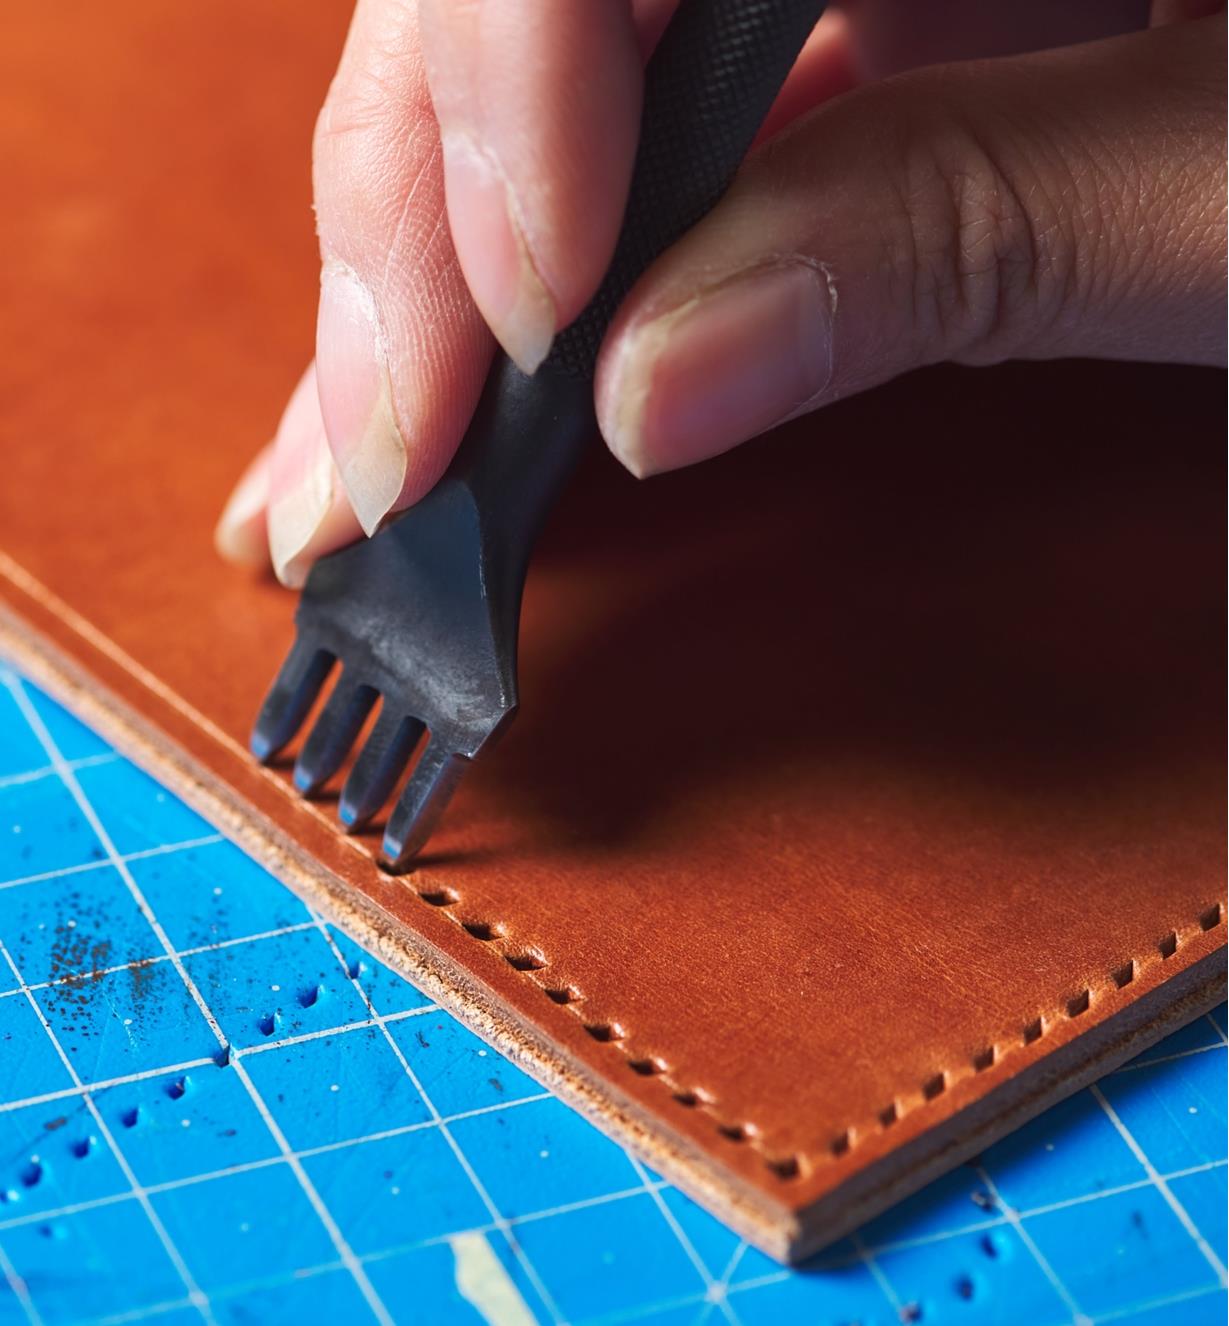 Making the stitch holes with the four-point stitching chisel